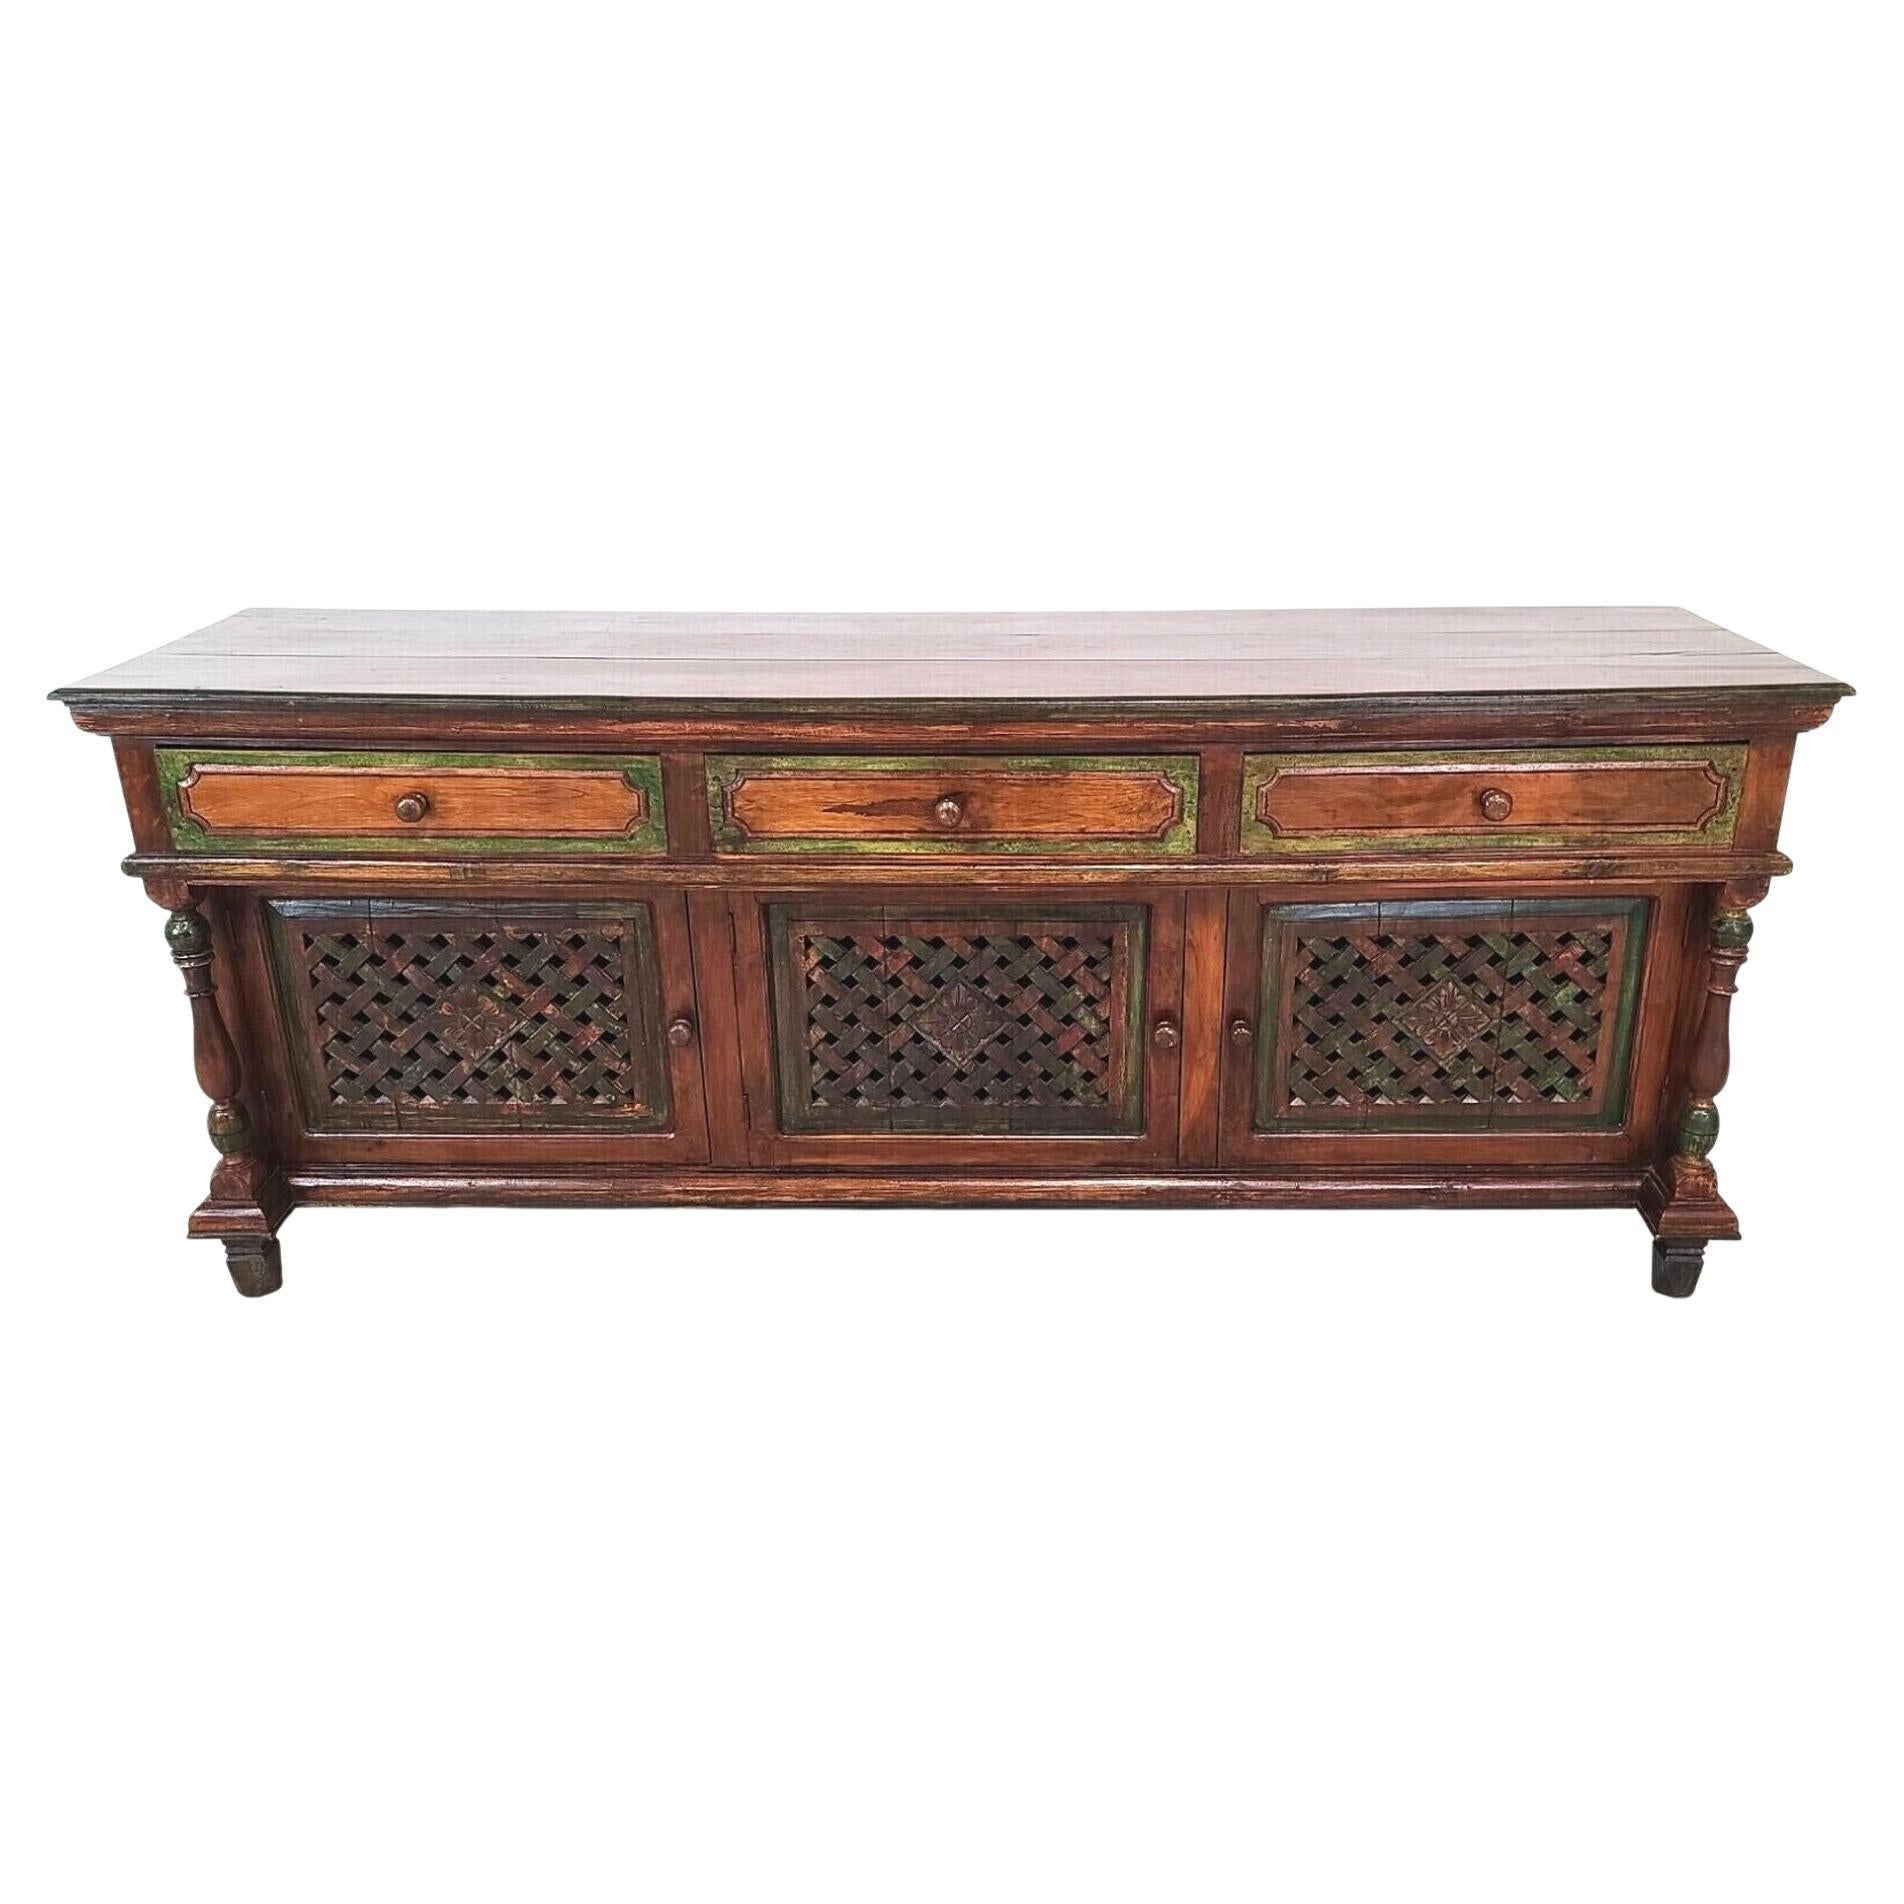 Antique Polychrome French Country Credenza Bar Sideboard